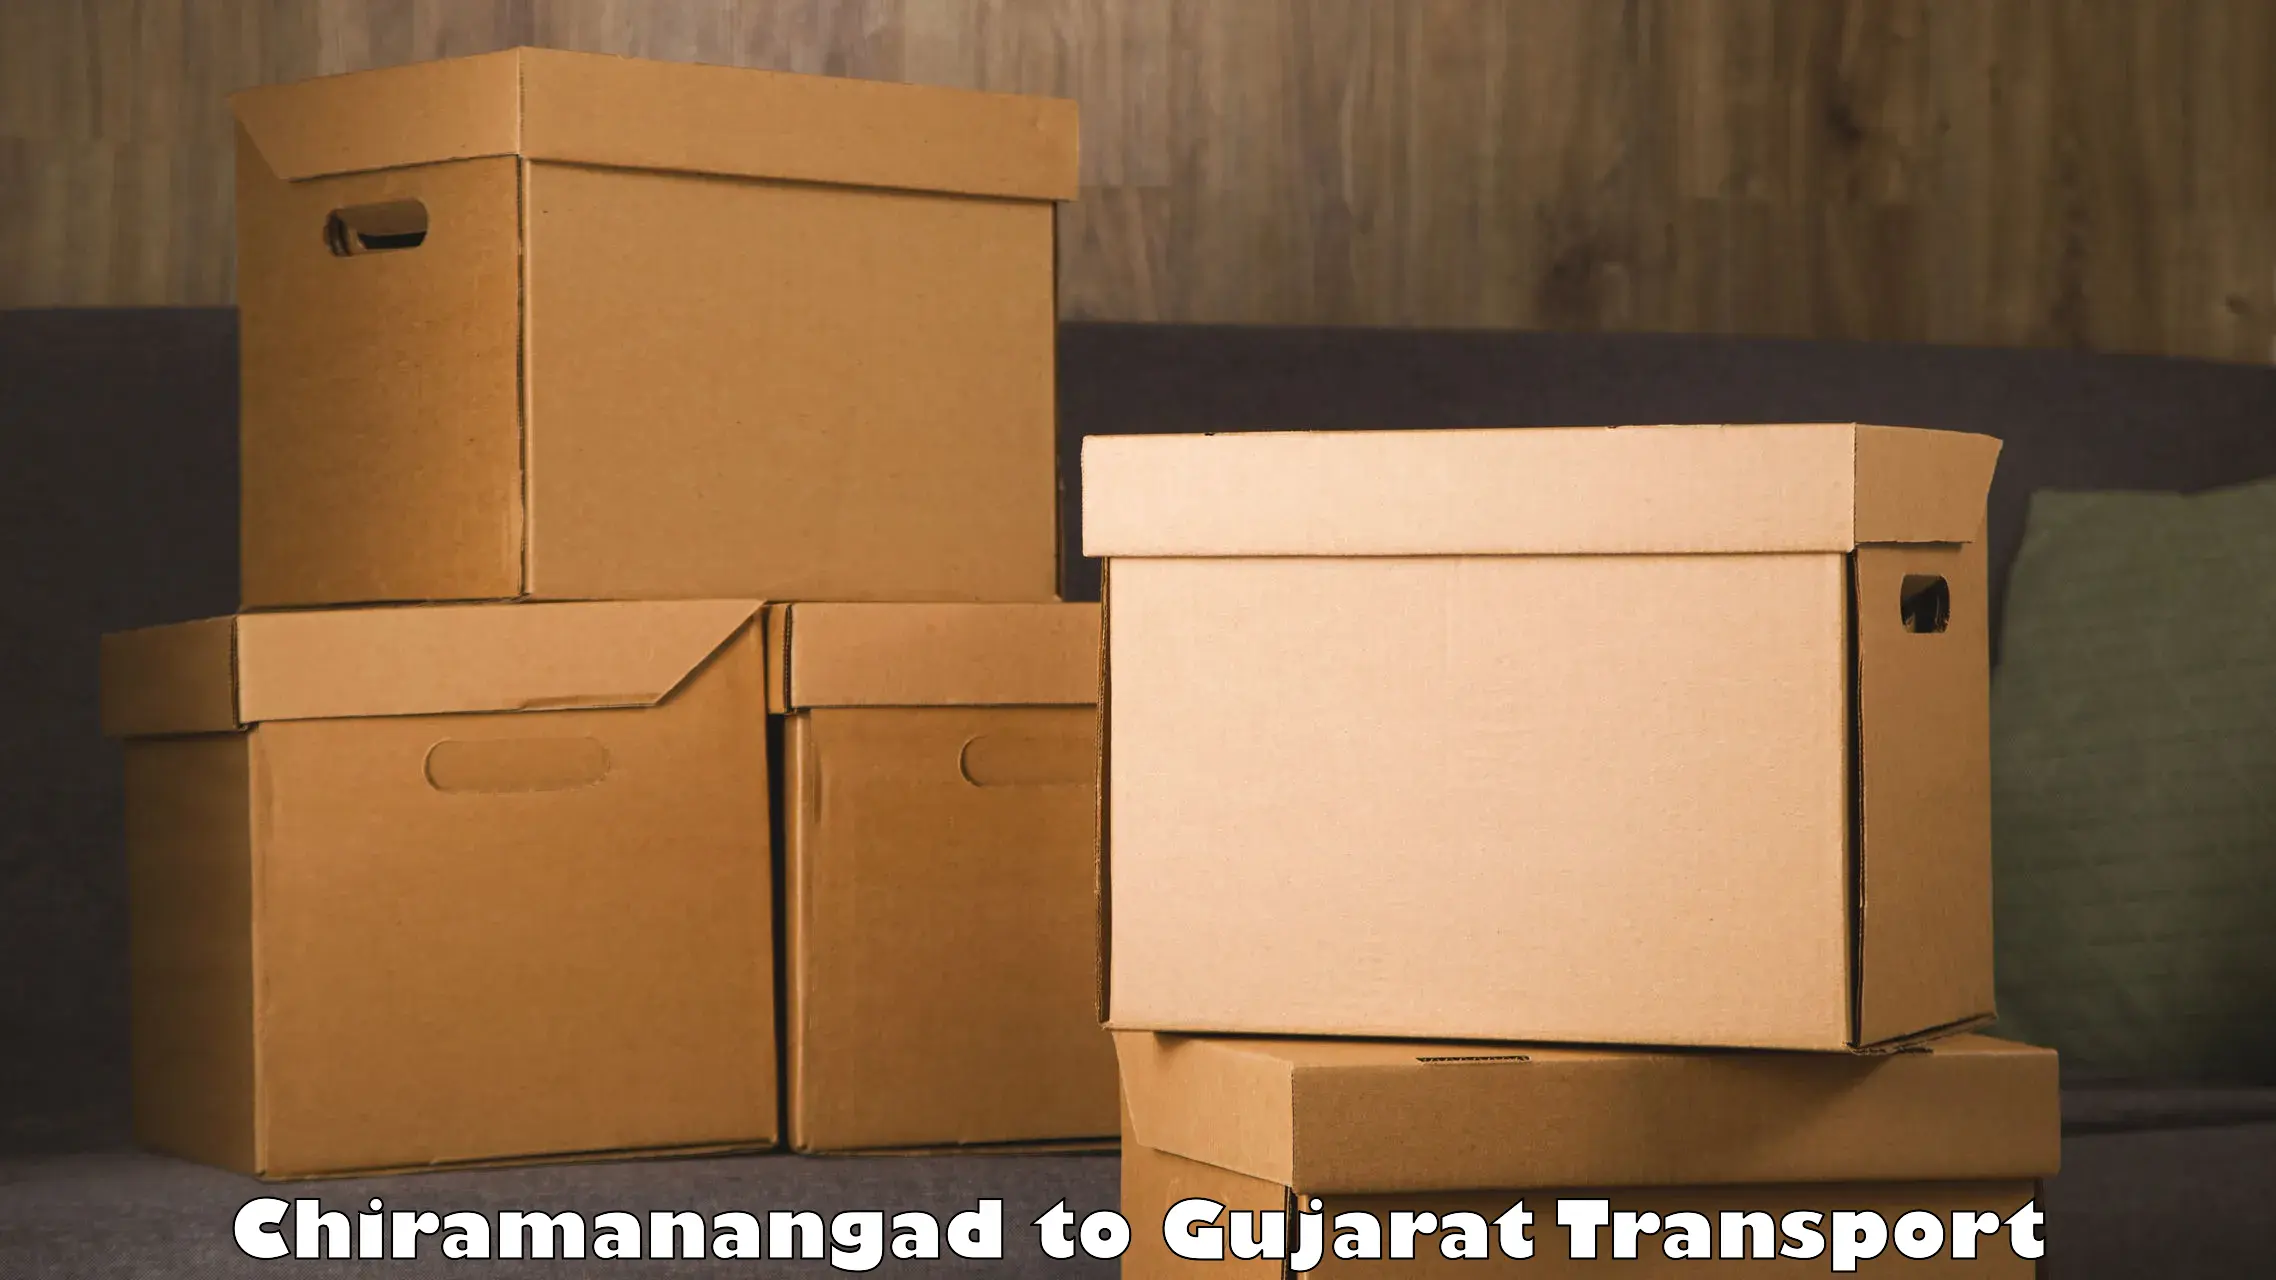 Commercial transport service Chiramanangad to Patan